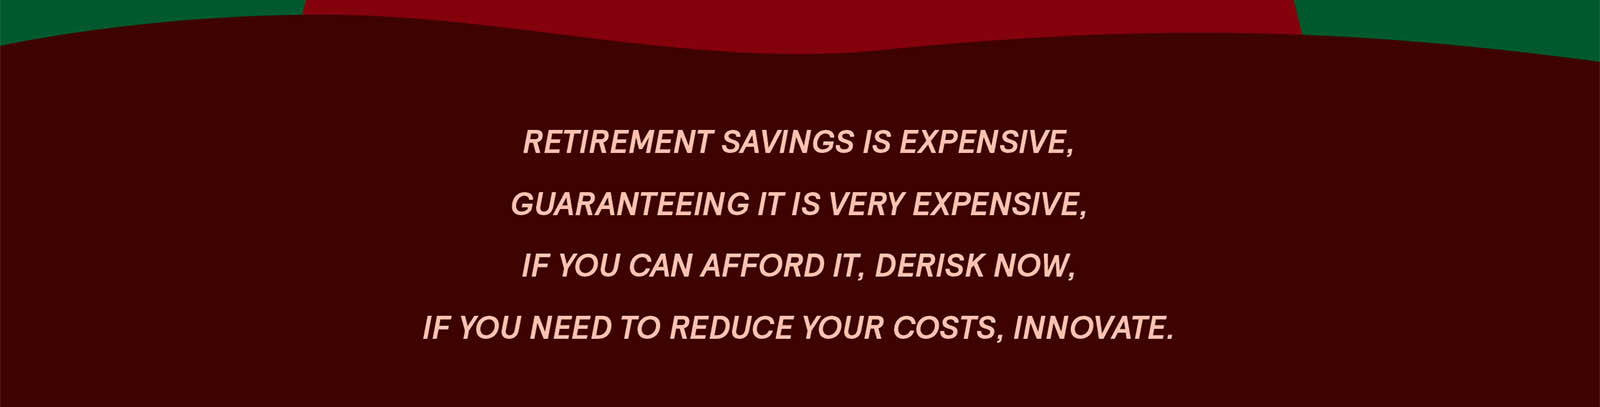 Retirement savings is expensive, guaranteeing it is very expensive, if you can afford it, de-risk now, if you need to reduce your costs, innovate.